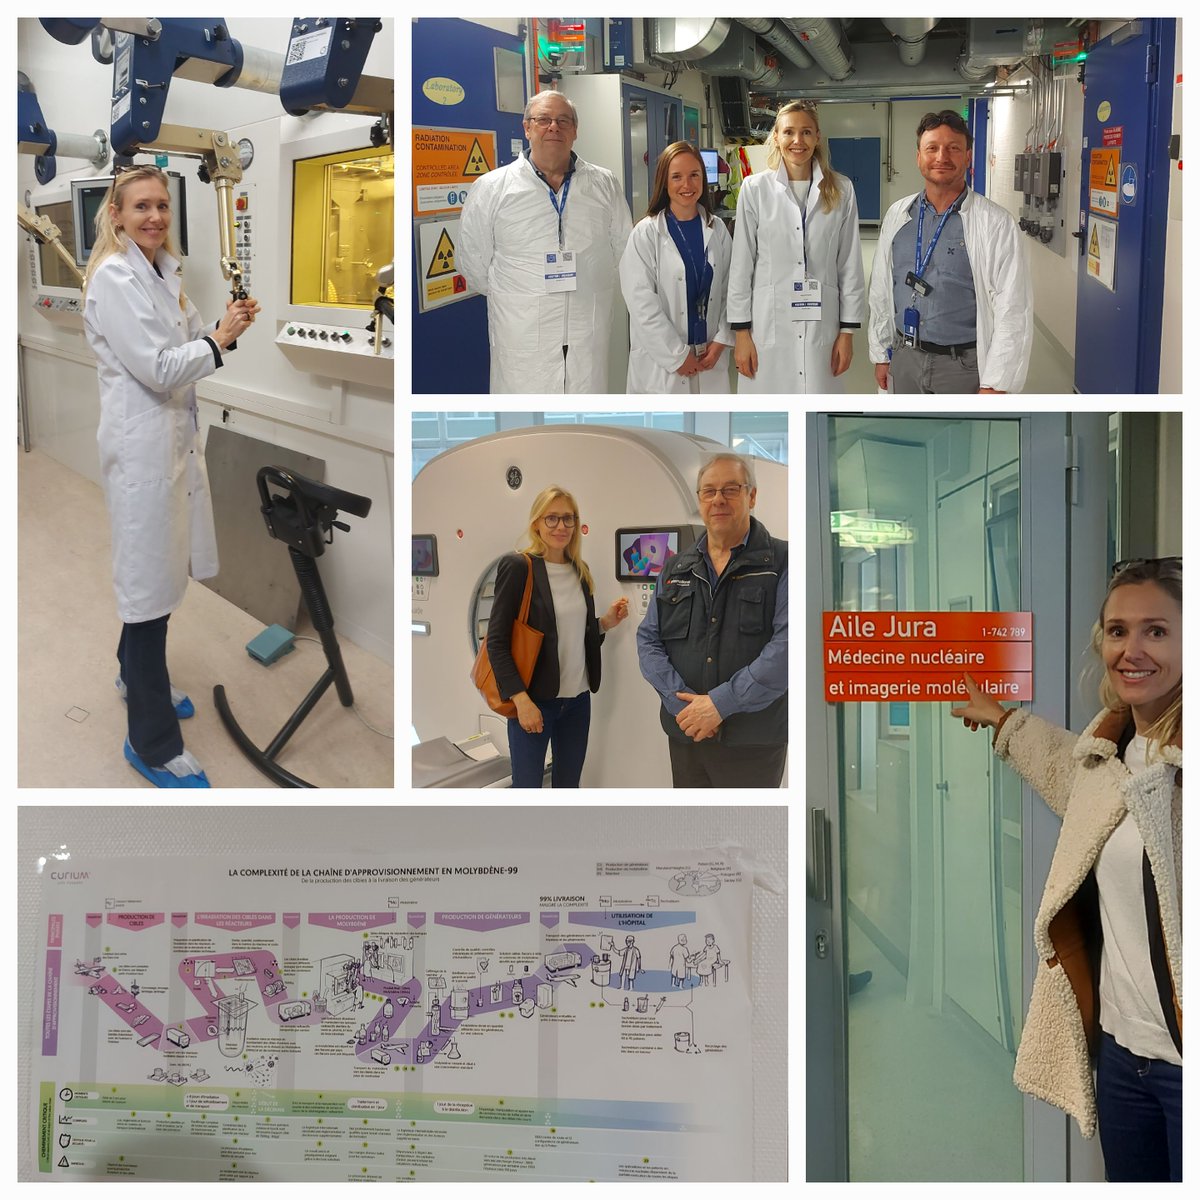 Thrilled to have explored the cutting-edge research at @CERN in Geneva! From groundbreaking discoveries to life-saving innovations in #nuclear medicine, the journey was truly enlightening. The insights contribute to the @EU_EESC work on security of #radioisotope supply.